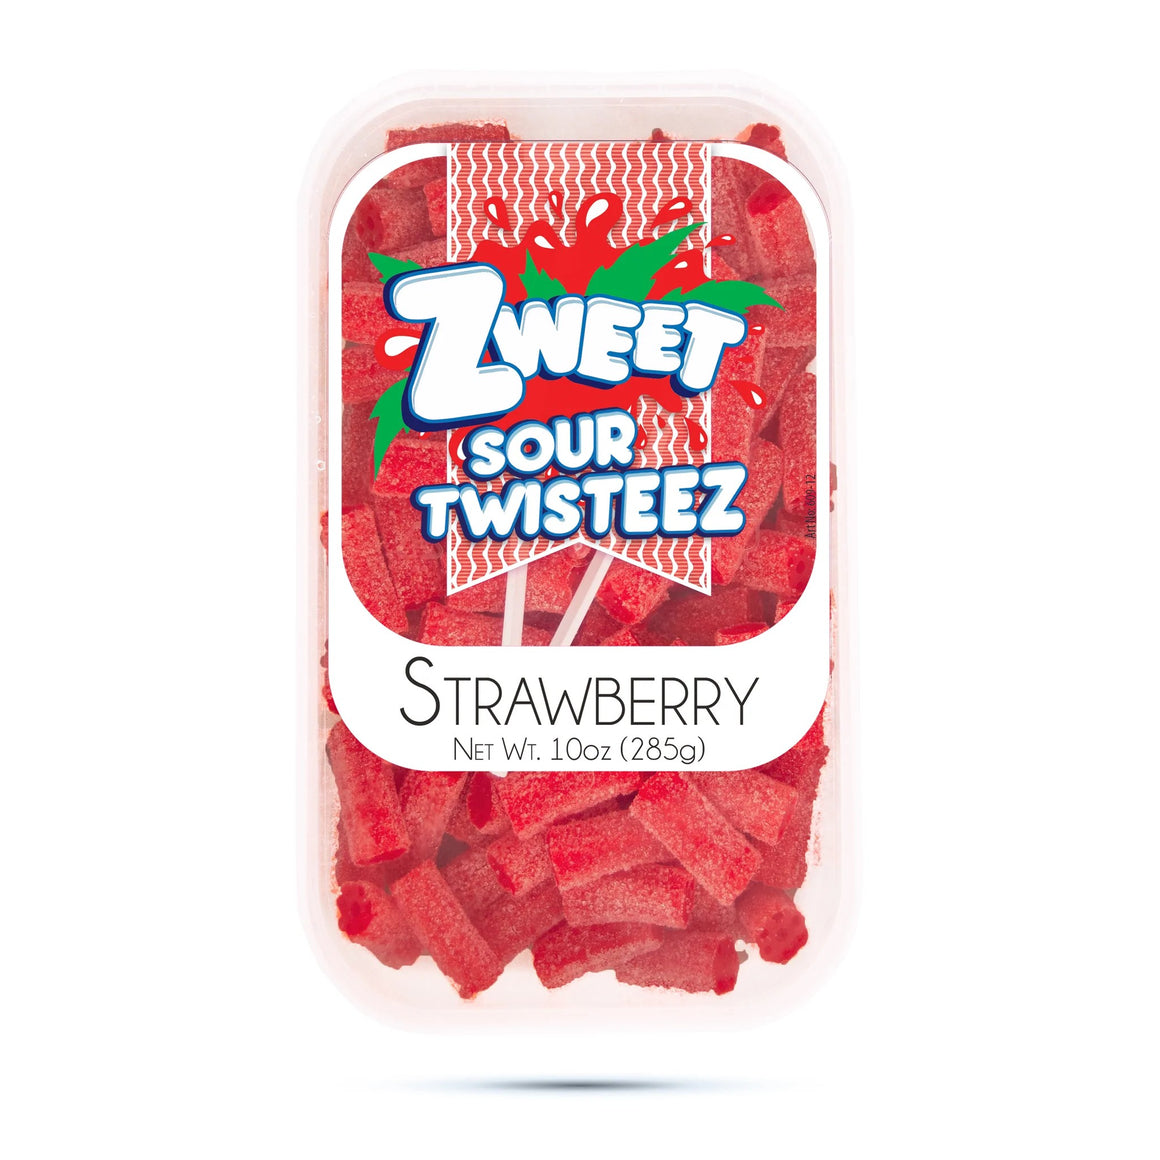 All City Candy Zweet Sour Twisteez Strawberry 10 oz. Tub Gummi Galil Foods For fresh candy and great service, visit www.allcitycandy.com